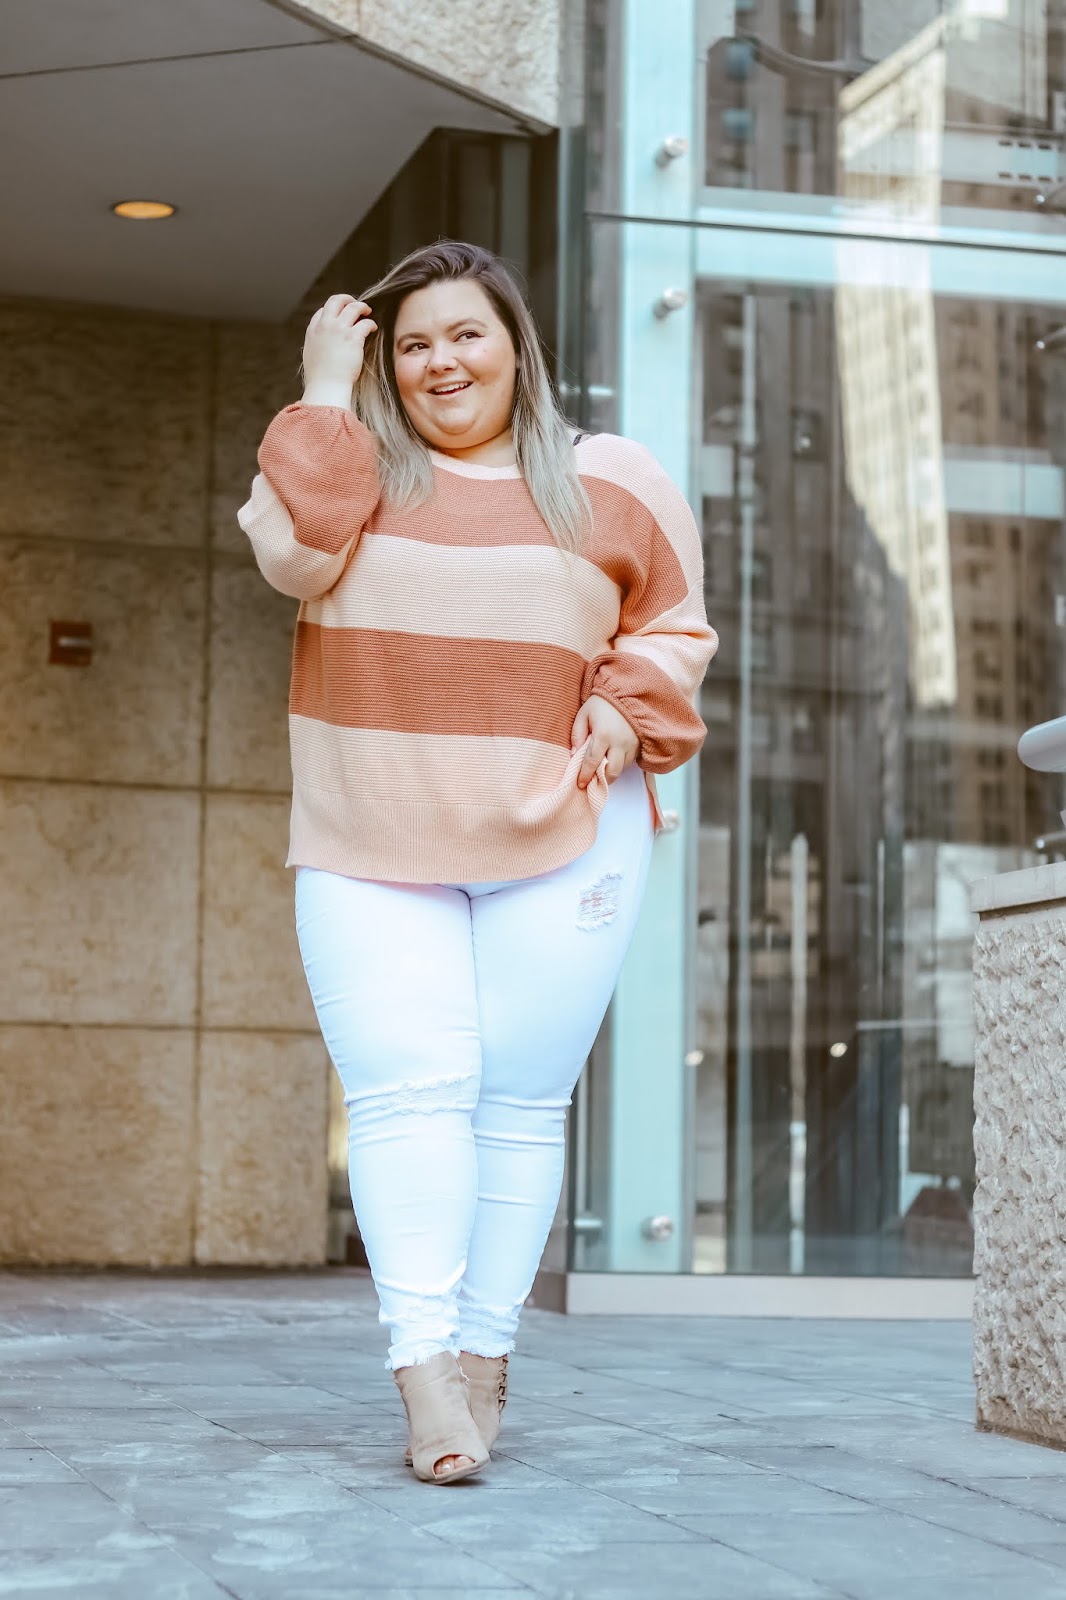 Chicago Plus Size Petite Fashion Blogger Natalie in the City reviews Chic Soul's white skinny jeans and a striped sweater.